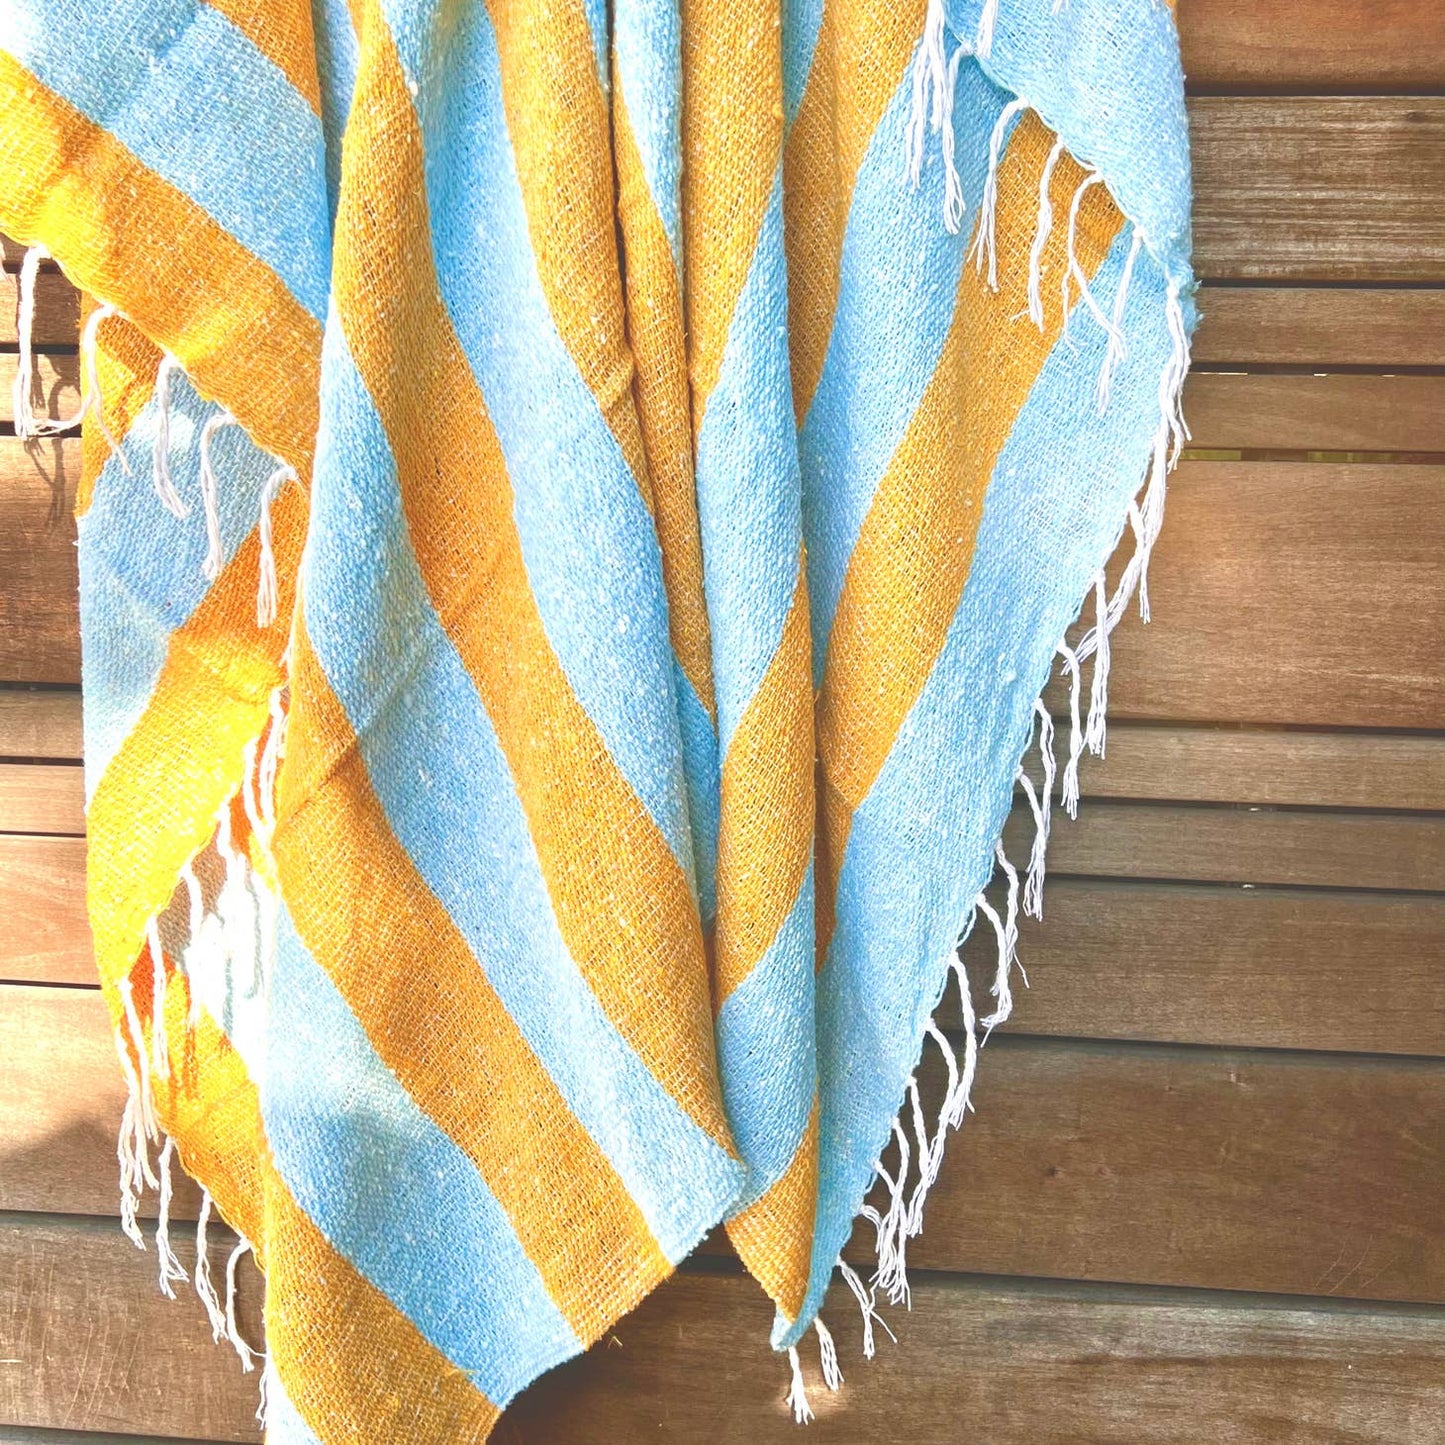 Mexican Blankets - Two Blanket Bundle - Free Shipping